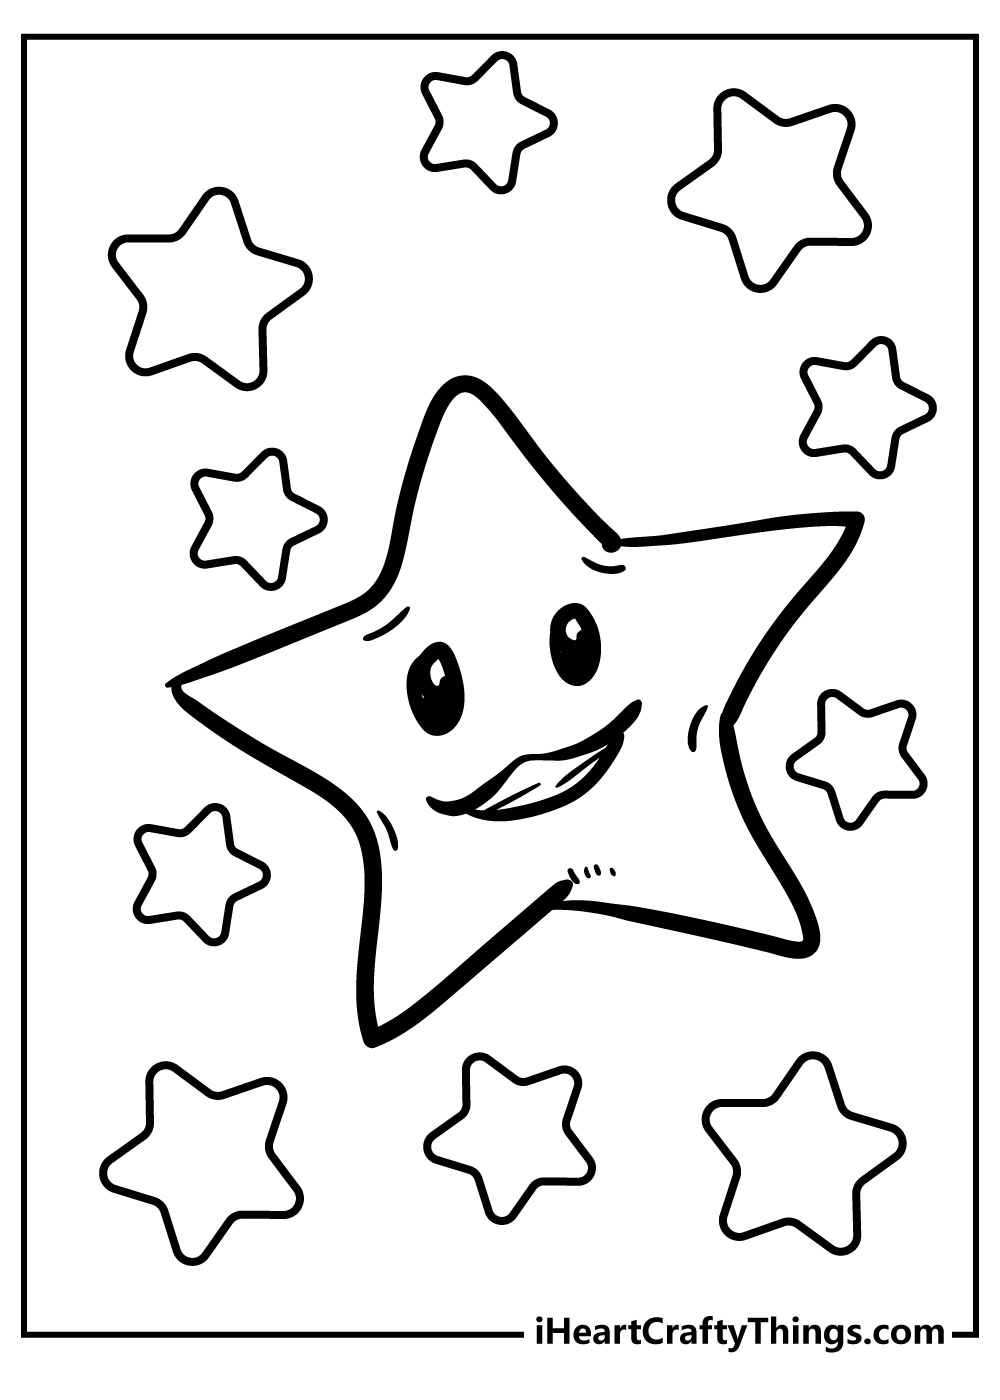 Star coloring pages free printables